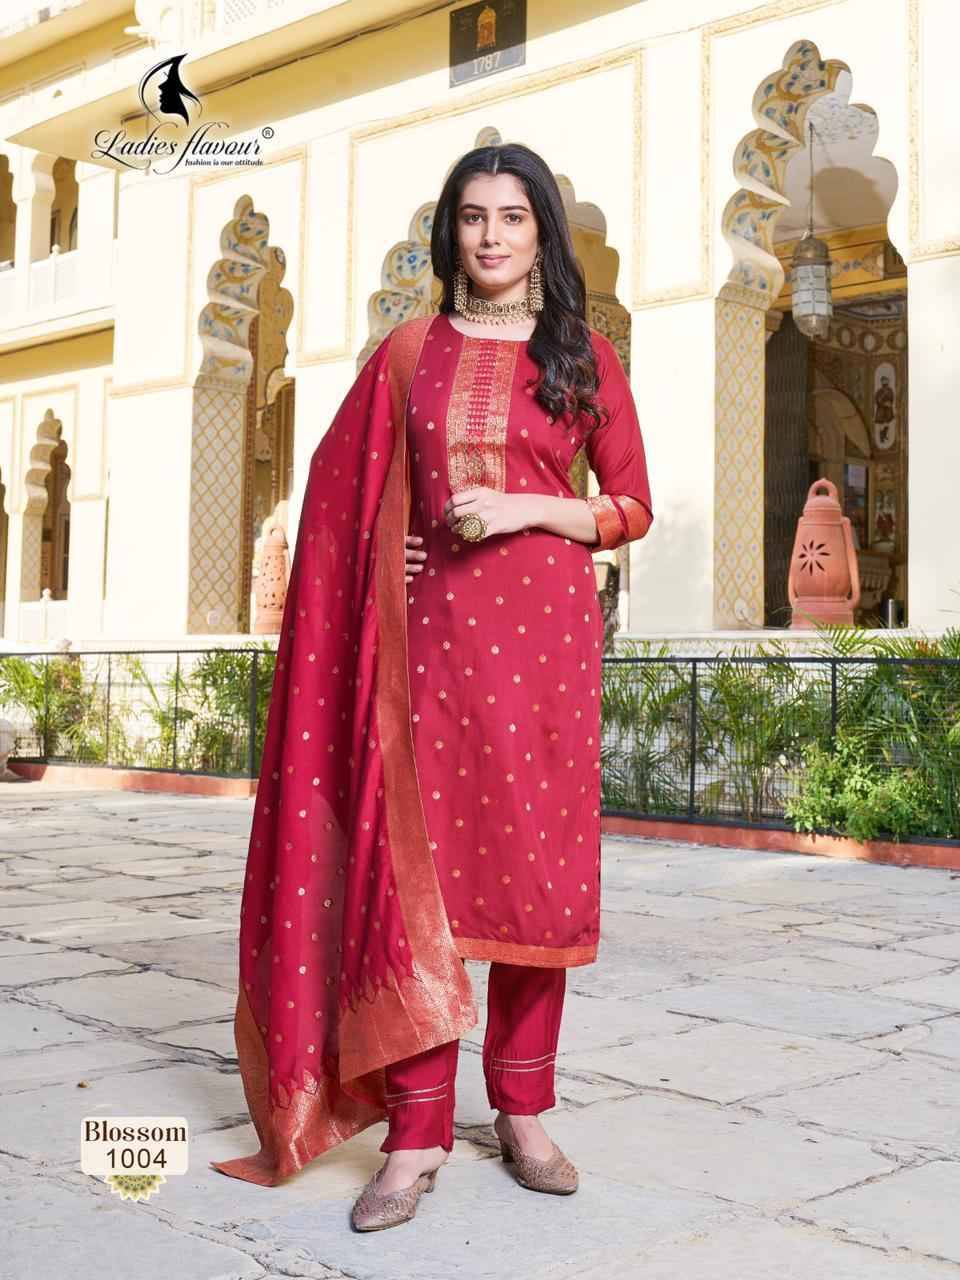 Blossom By Ladies Flavour 1001 To 1004 Series Beautiful Festive Suits Colorful Stylish Fancy Casual Wear & Ethnic Wear Chanderi Dola Jacquard Dresses At Wholesale Price